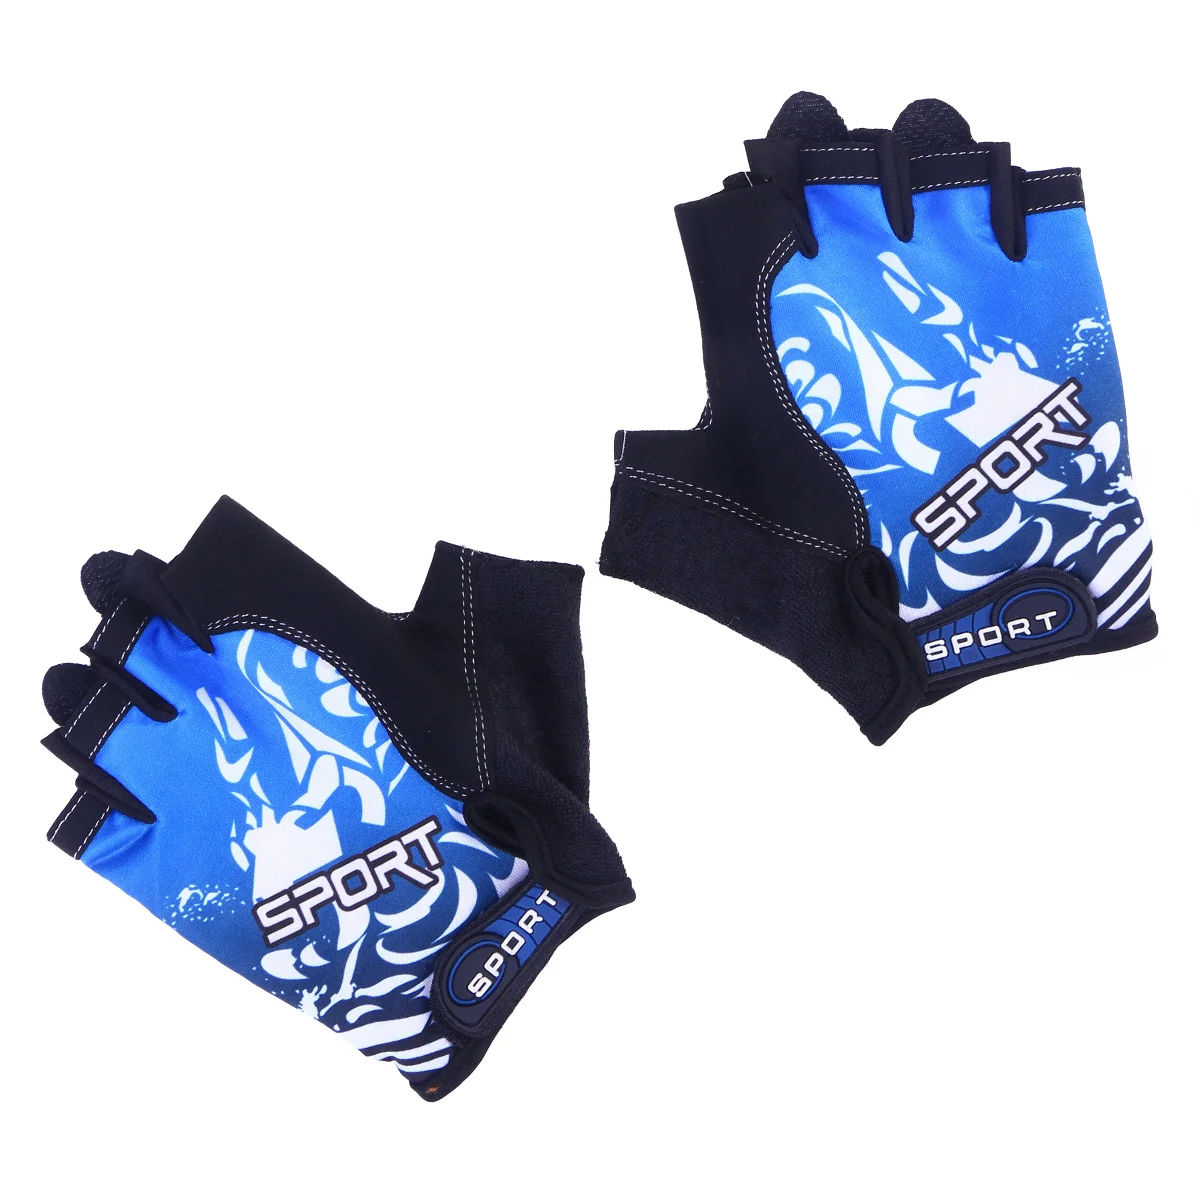 1 Pair Outdoor Sports Half Finger Gloves Non-Slip Breathable Workout Gloves for Cycling Climbing Fishing Riding Size M (Blue) non slip stab resistant breathable fishing gloves full finger durable fishing riding gloves carp fishing comfort